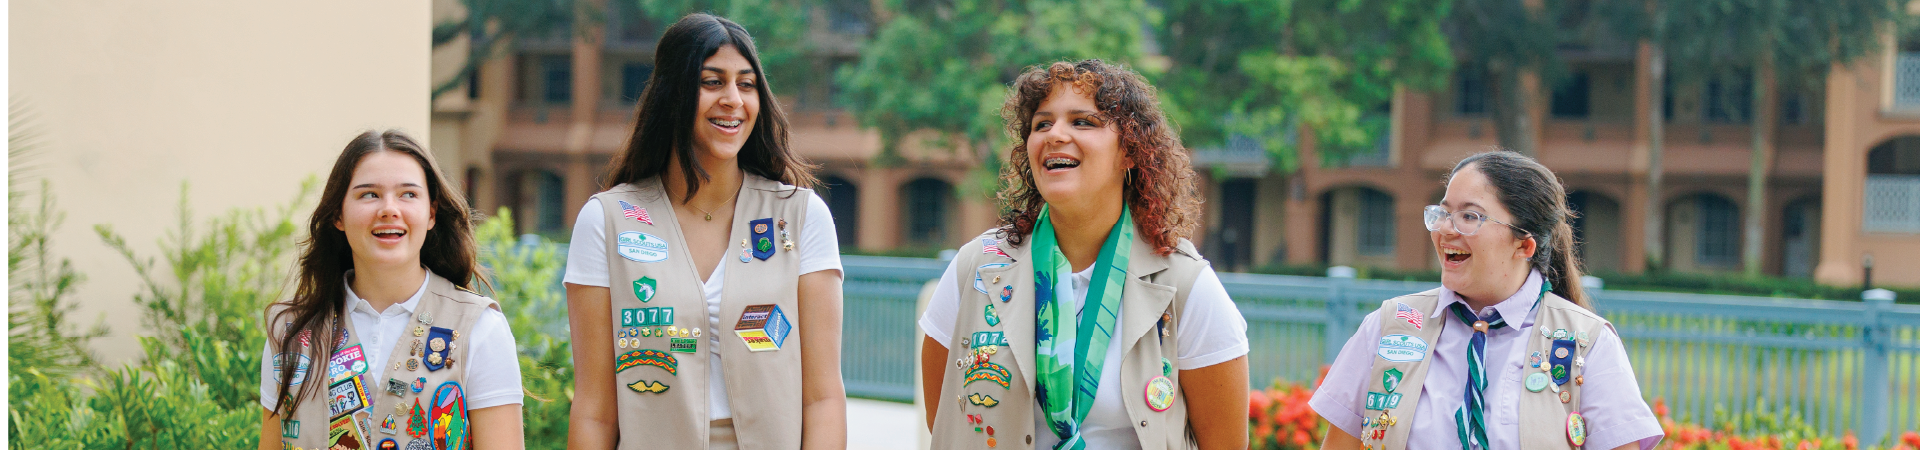  two senior girl scouts wearing sash uniforms outside standing back to back and smiling at the camera 